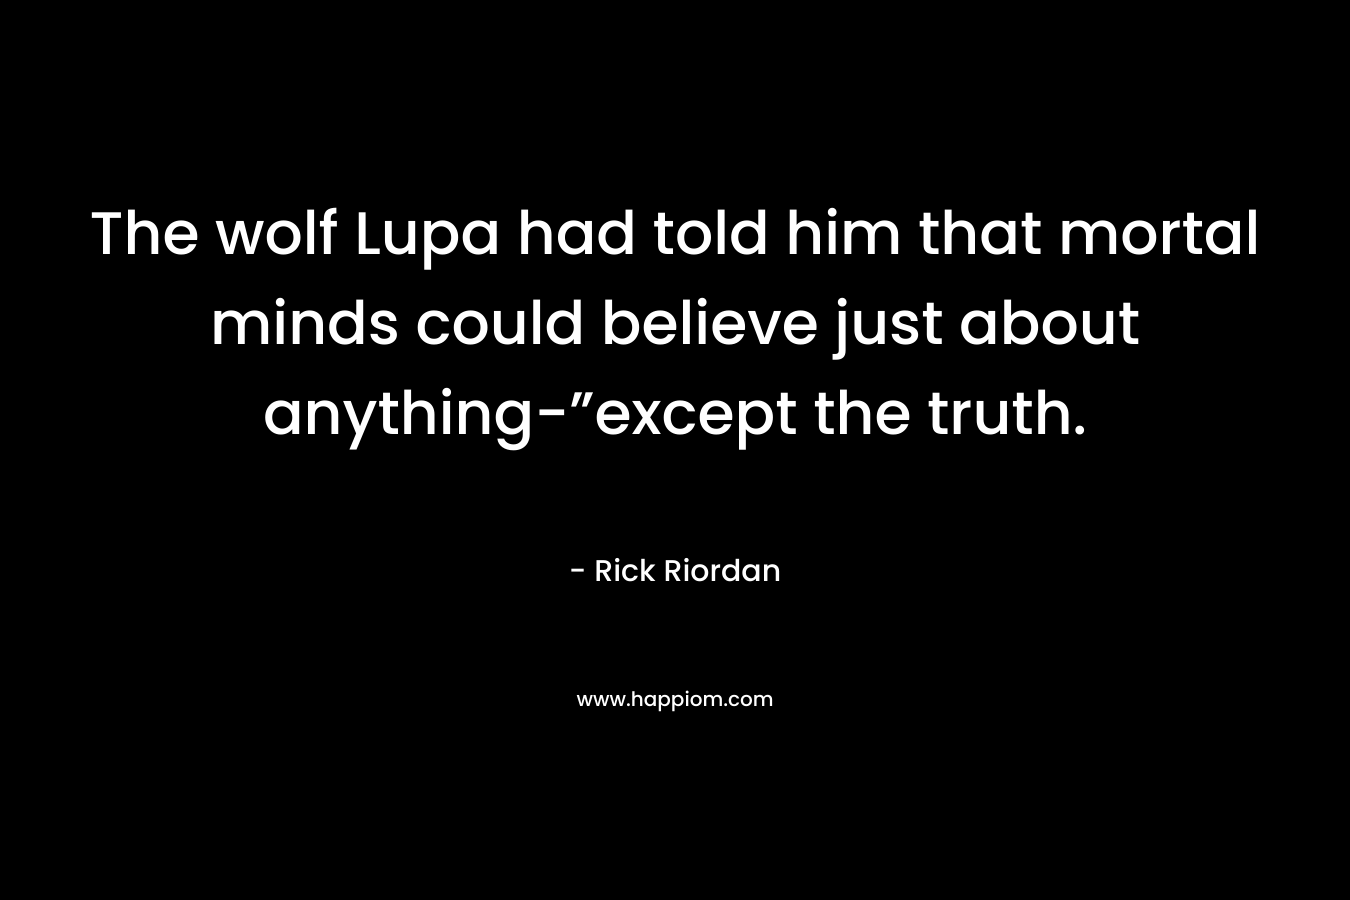 The wolf Lupa had told him that mortal minds could believe just about anything-”except the truth.